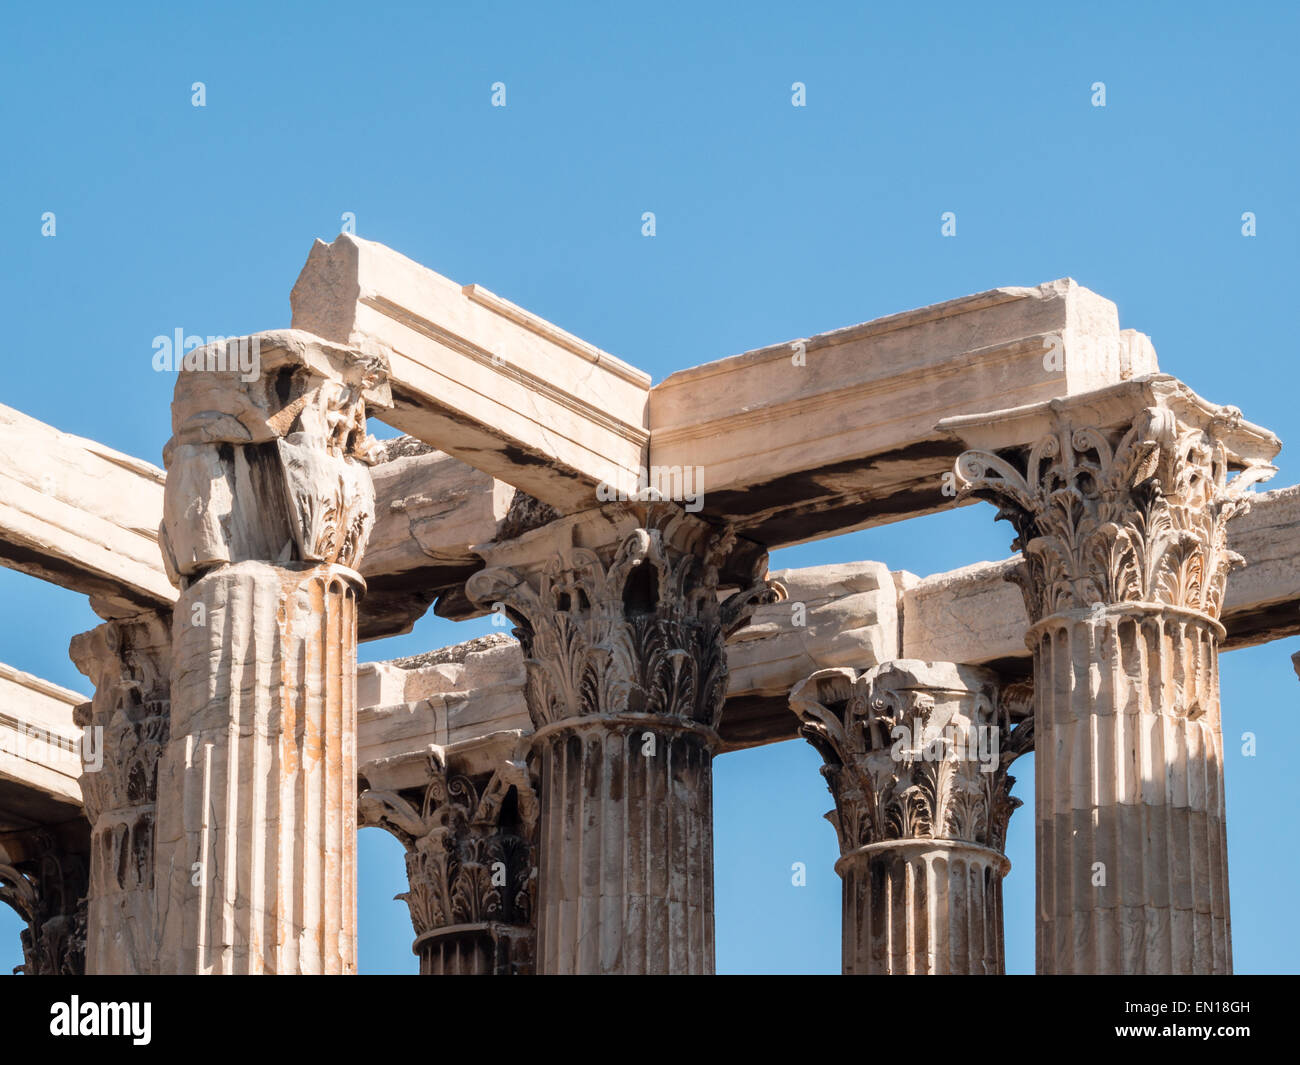 Detail of the Corinthian chapiter of the columns of the Olympian Zeus temple ruins in Athens Stock Photo